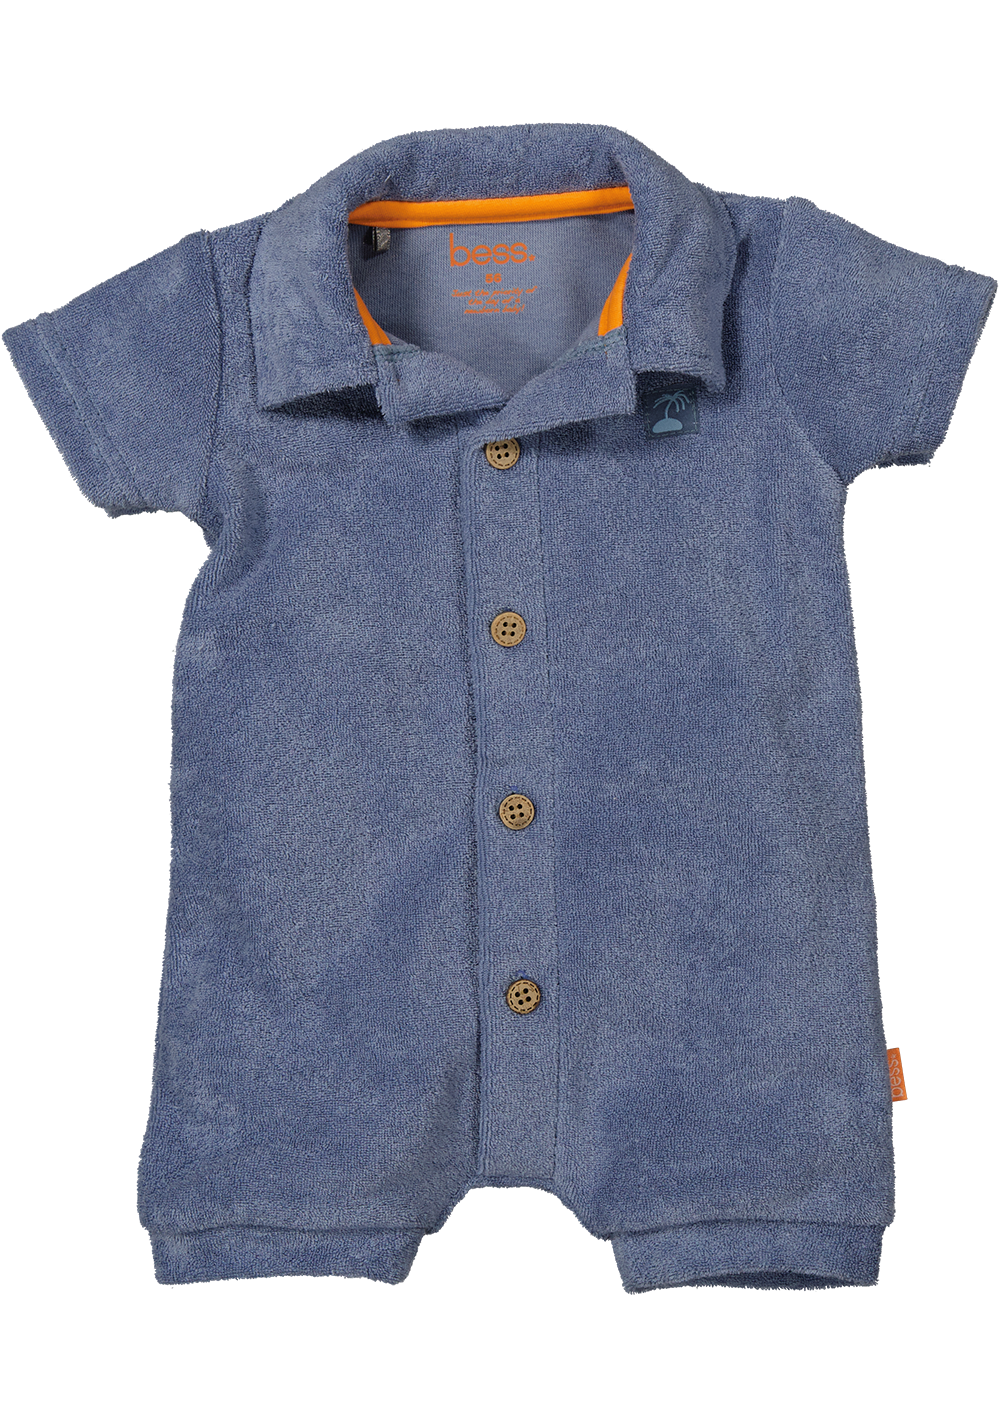 BESS S24 l2 Playsuit Towelling Country Blue 241092-074